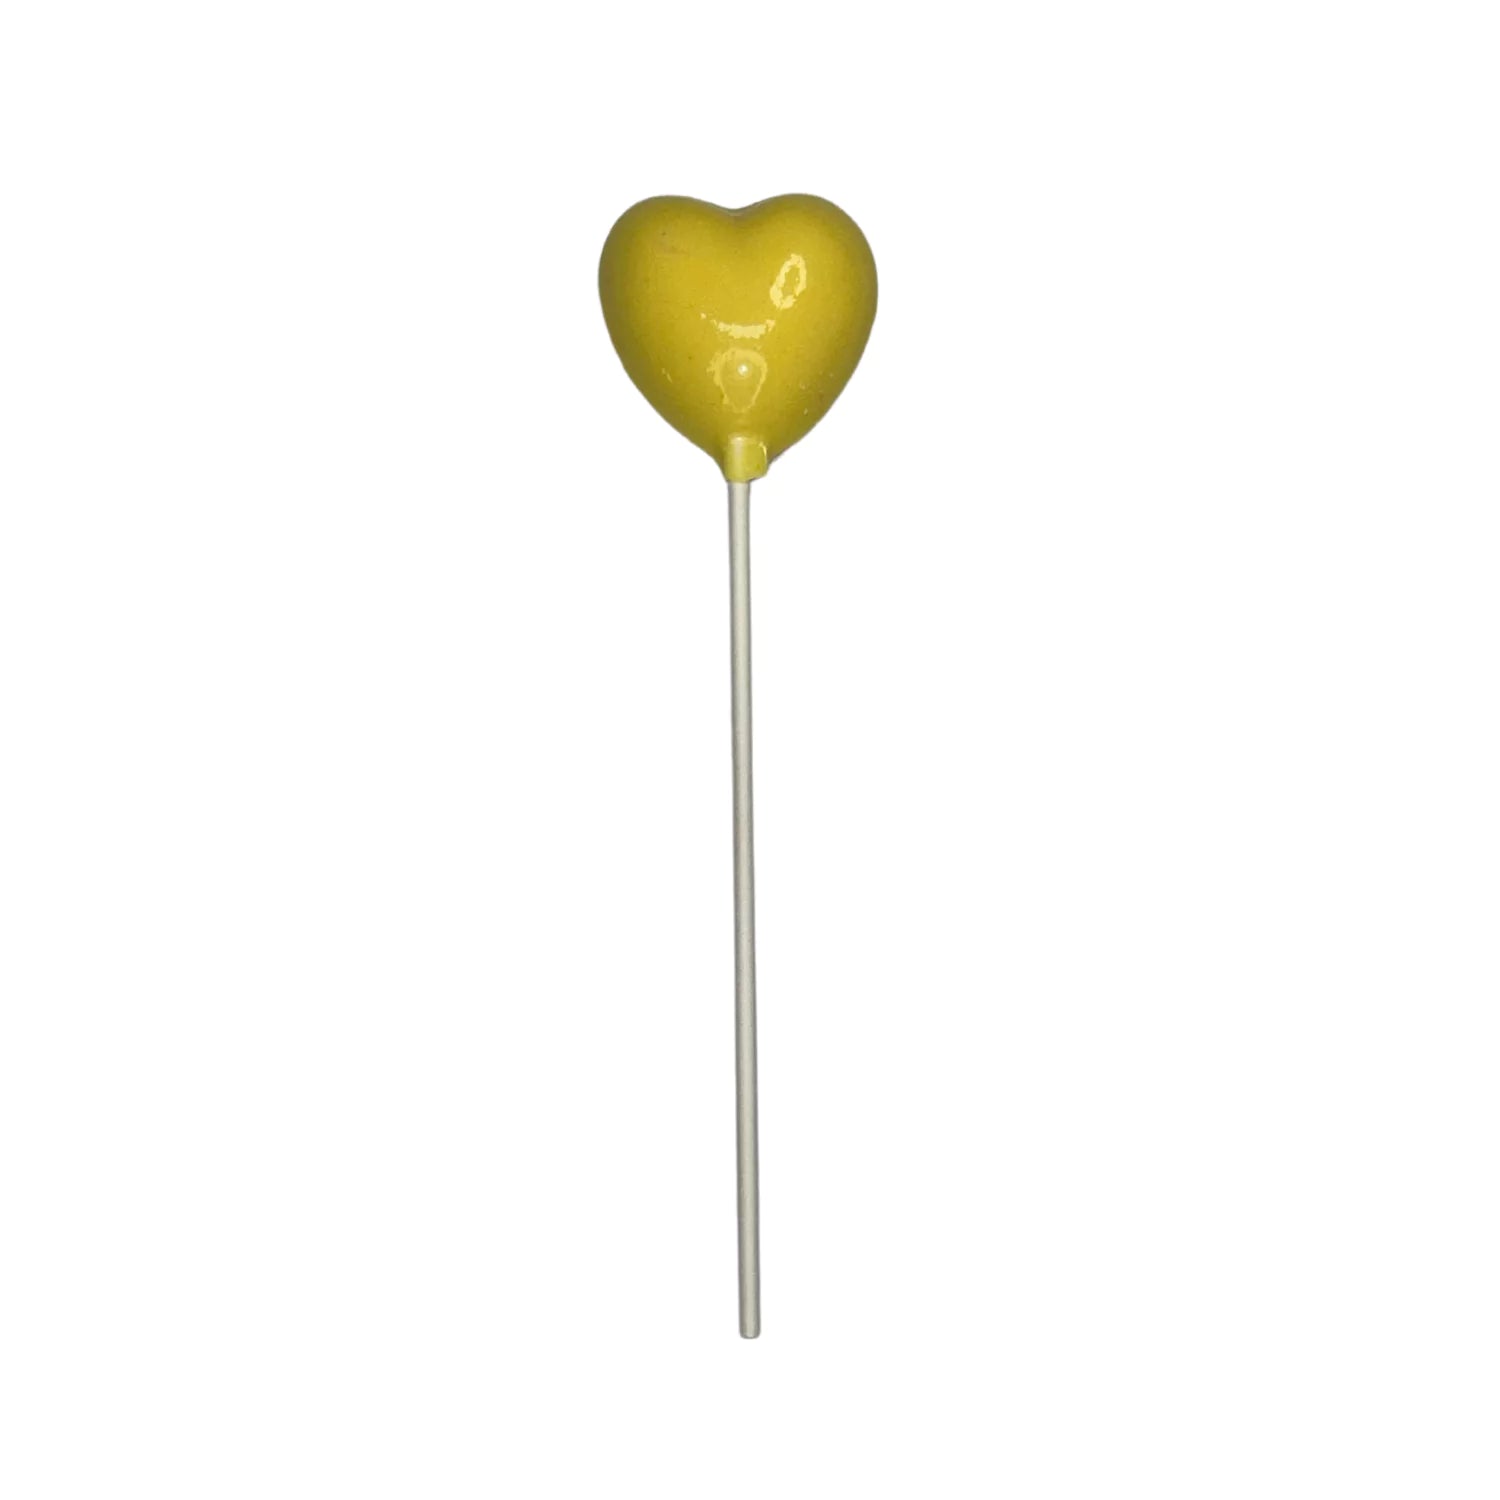 Assorted Colors Heart Lollipop Suckers 0.4 oz each Milk White Chocolate Yellow White Chocolate